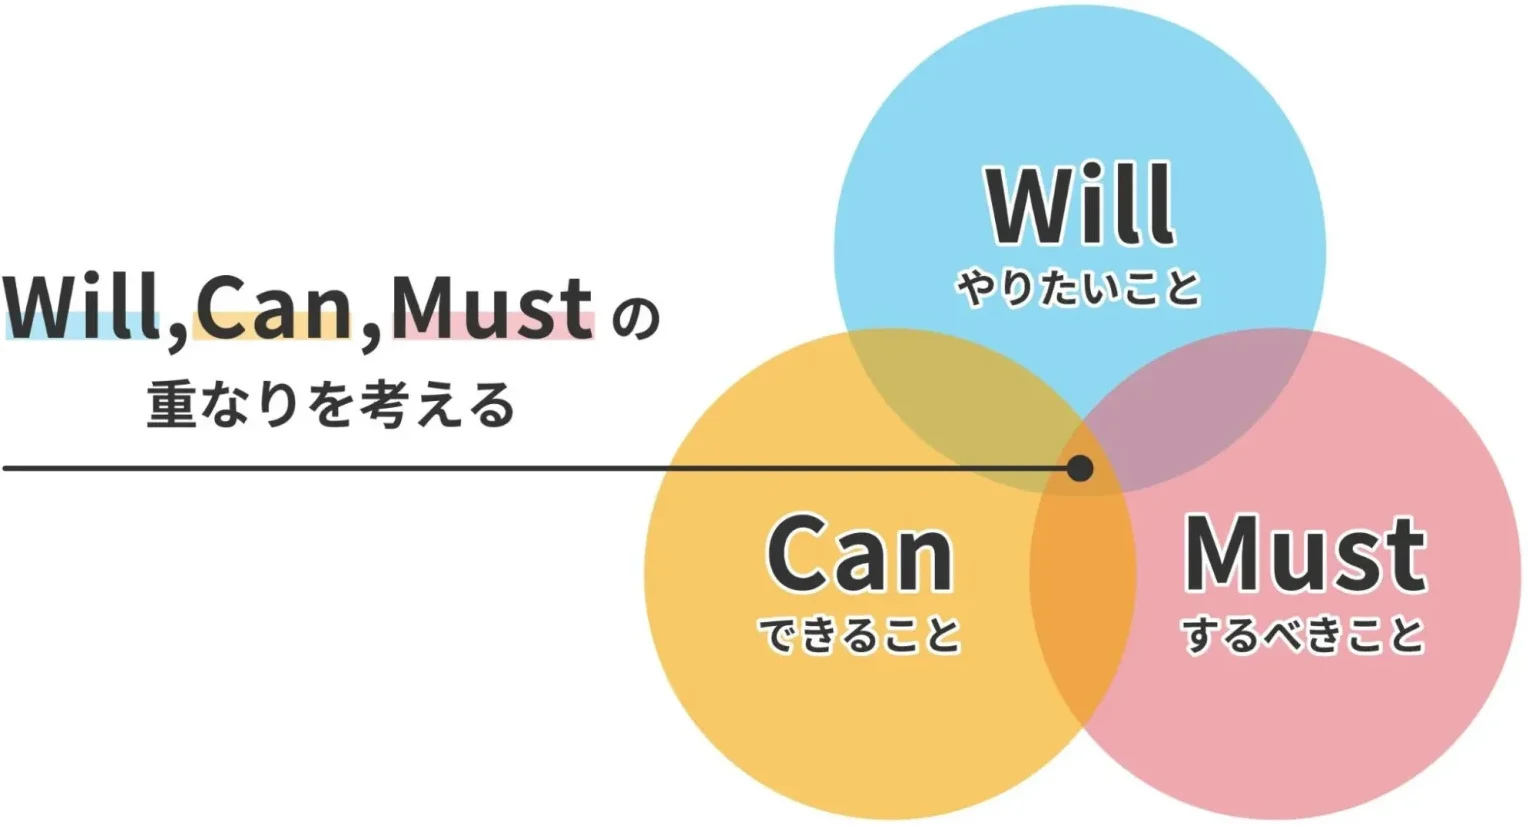 Will,Can,Mustのフレームワーク